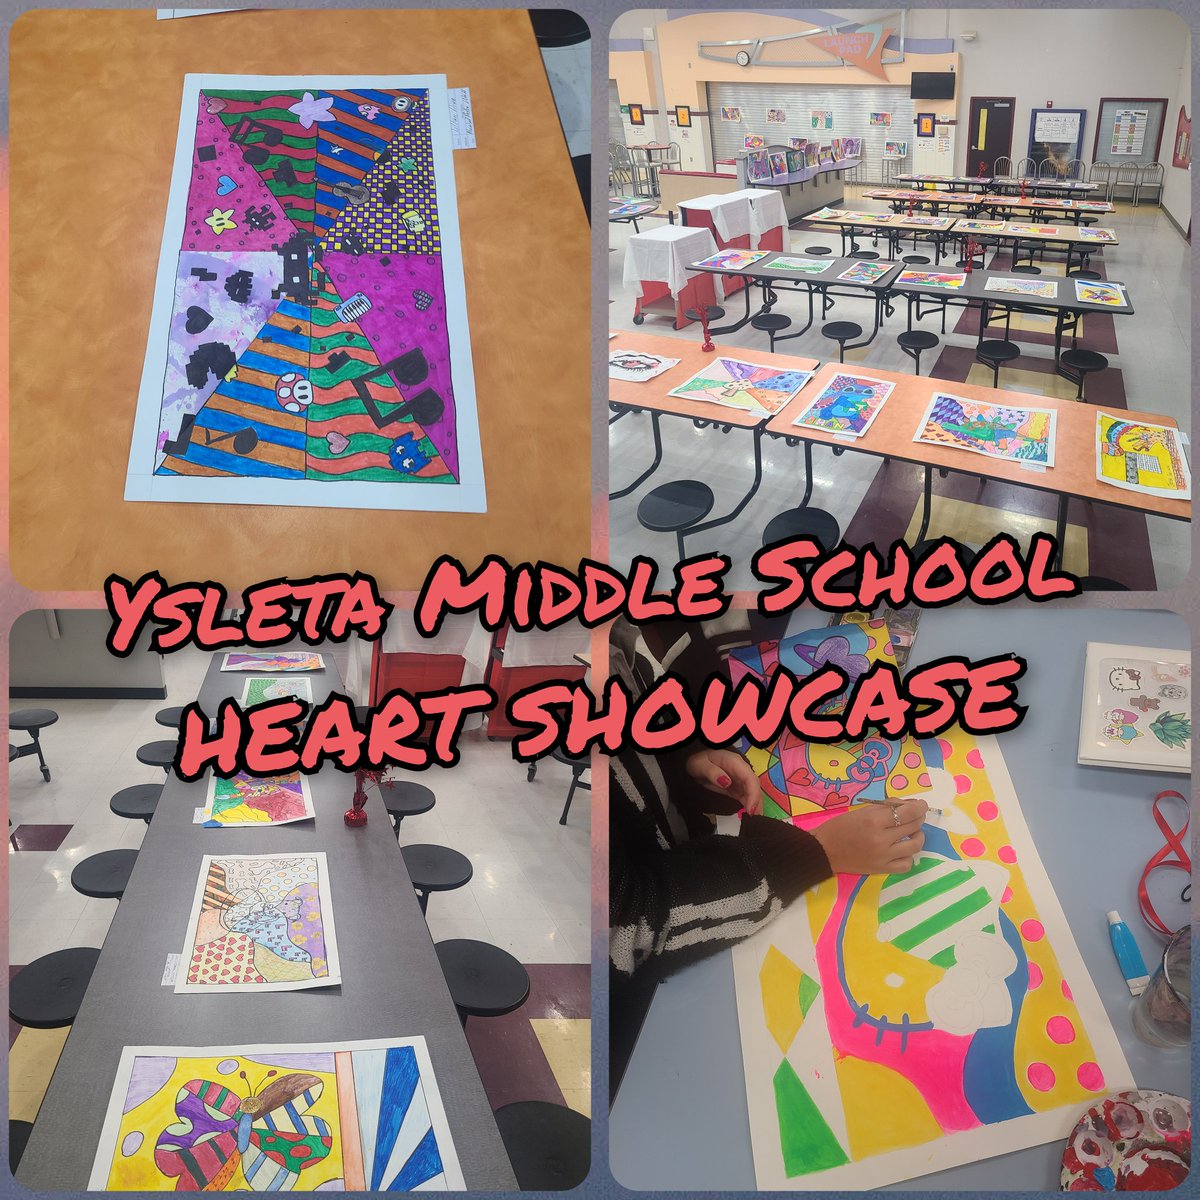 HeART Showcase at YSLETA MIDDLE SCHOOL today Feb. 15. Great work! Proud of all of you! @YsletaISD @YISDFineArts @YsletaMS